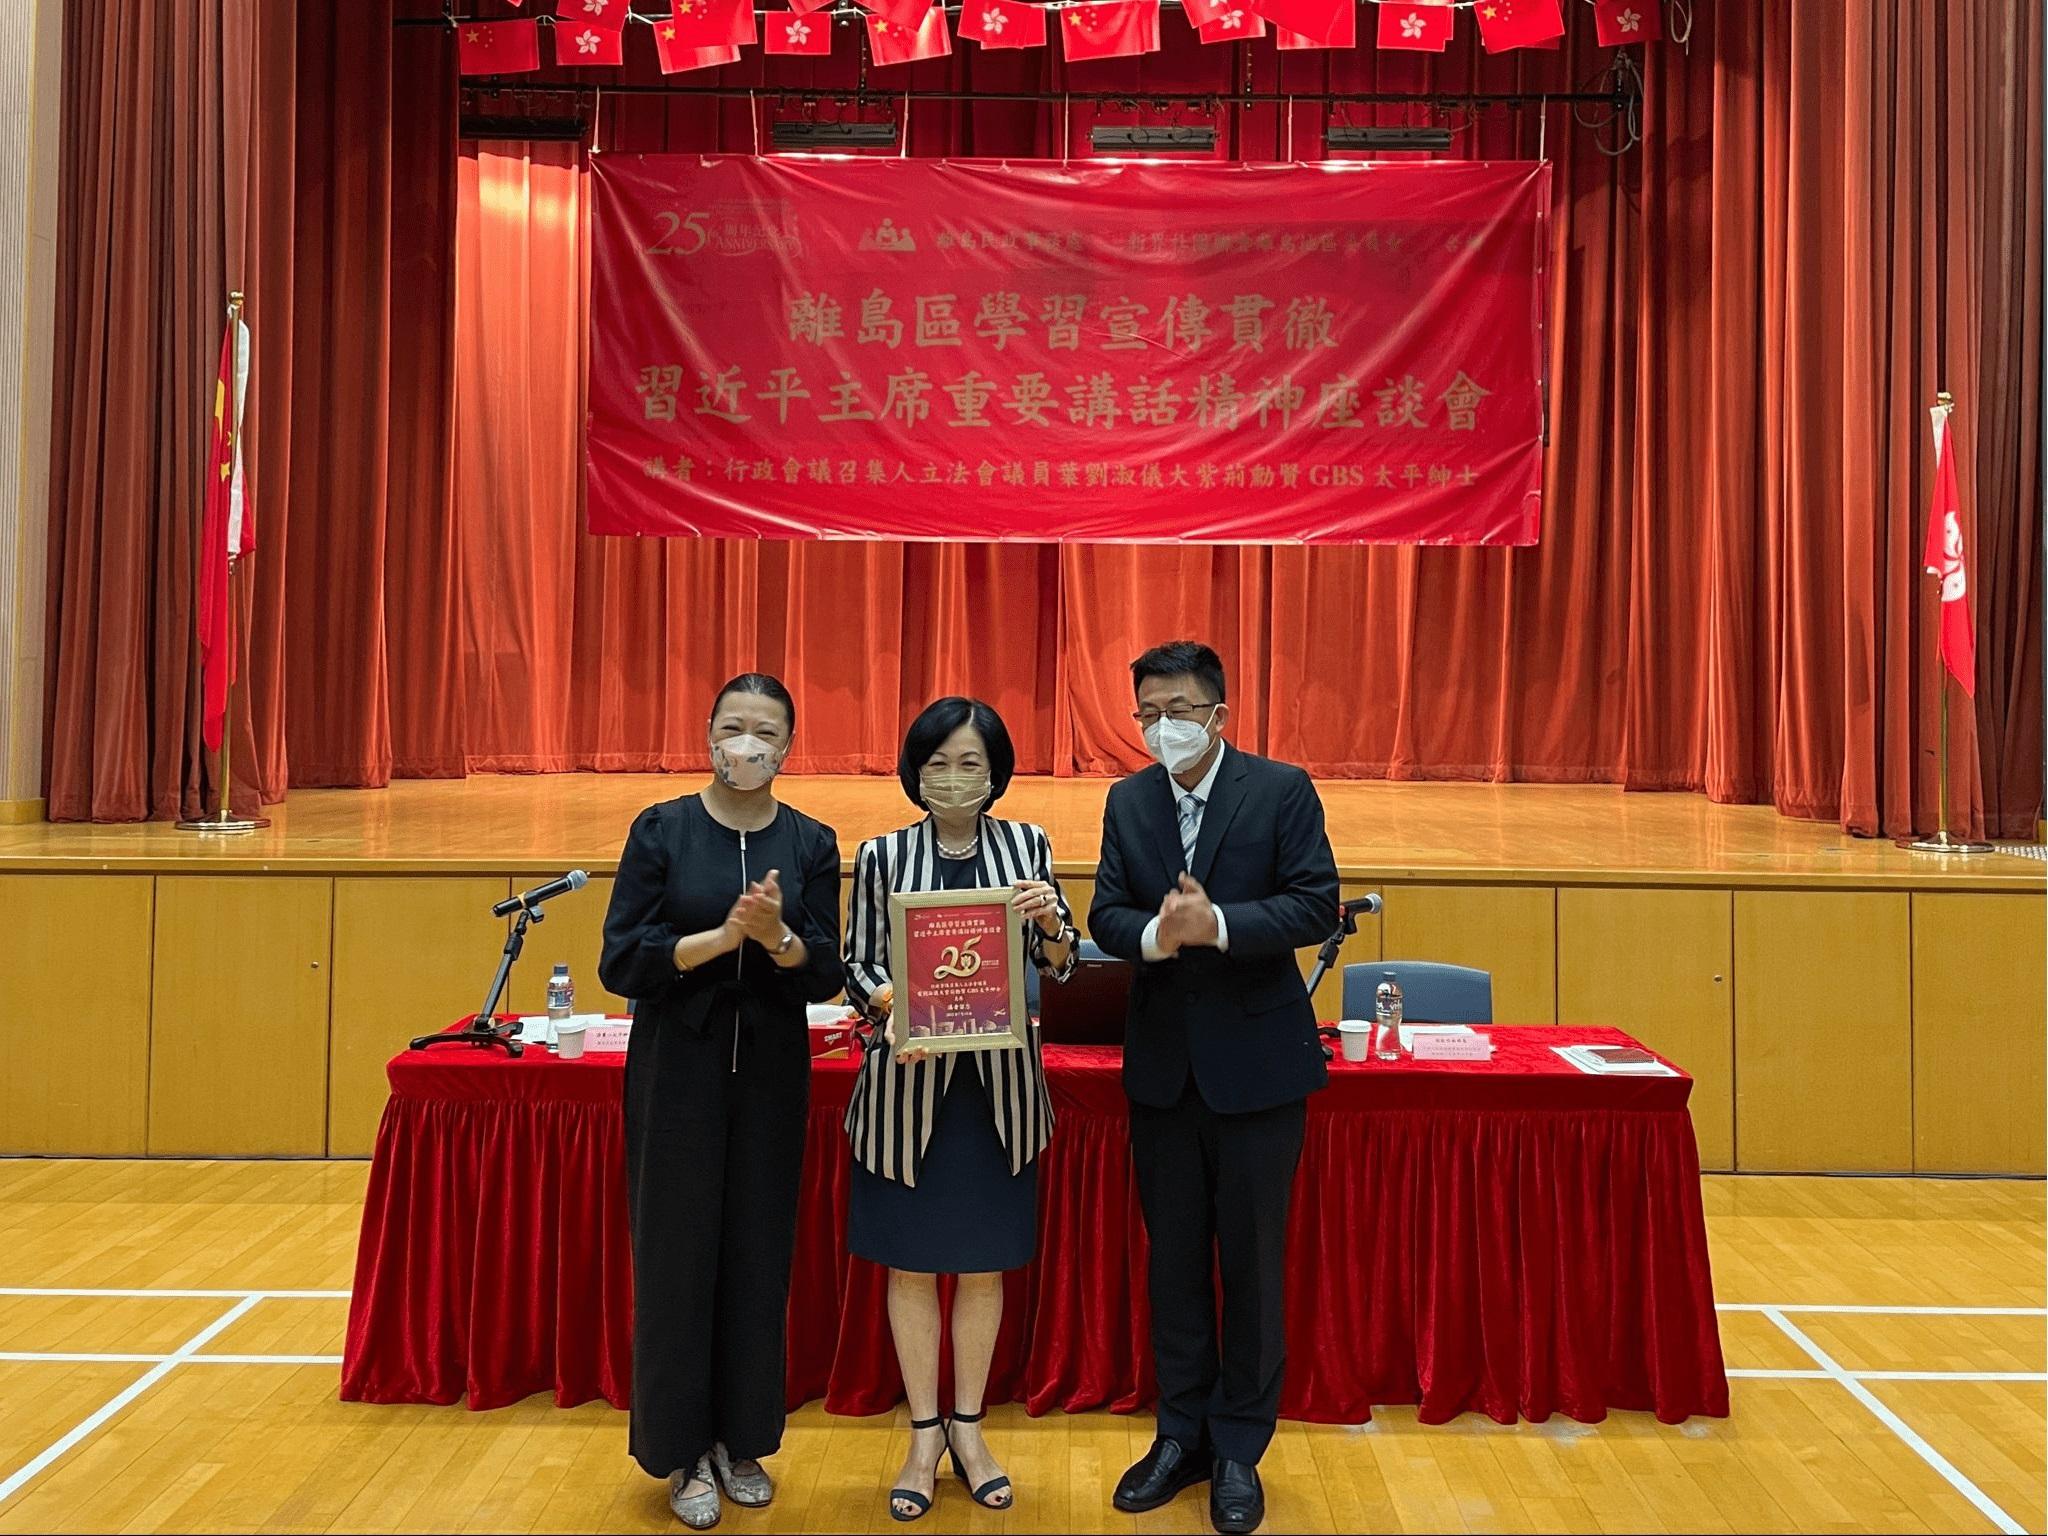 The Islands District Office, in collaboration with the New Territories Federation of Associations Islands District Committee, today (July 15) jointly held the "Session to Learn About, Promote and Implement the Spirit of President Xi's Important Speech" at Tung Chung Community Hall. Photo shows the District Officer (Islands), Miss Amy Yeung (first left), together with the Deputy Director General of the New Territories Sub-office of the Liaison Office of the Central People's Government in the Hong Kong Special Administrative Region, Mr Hu Qiming (first right), presenting a certificate of appreciation to Convenor of the Executive Council and Member of the Legislative Council Mrs Regina Ip (centre).